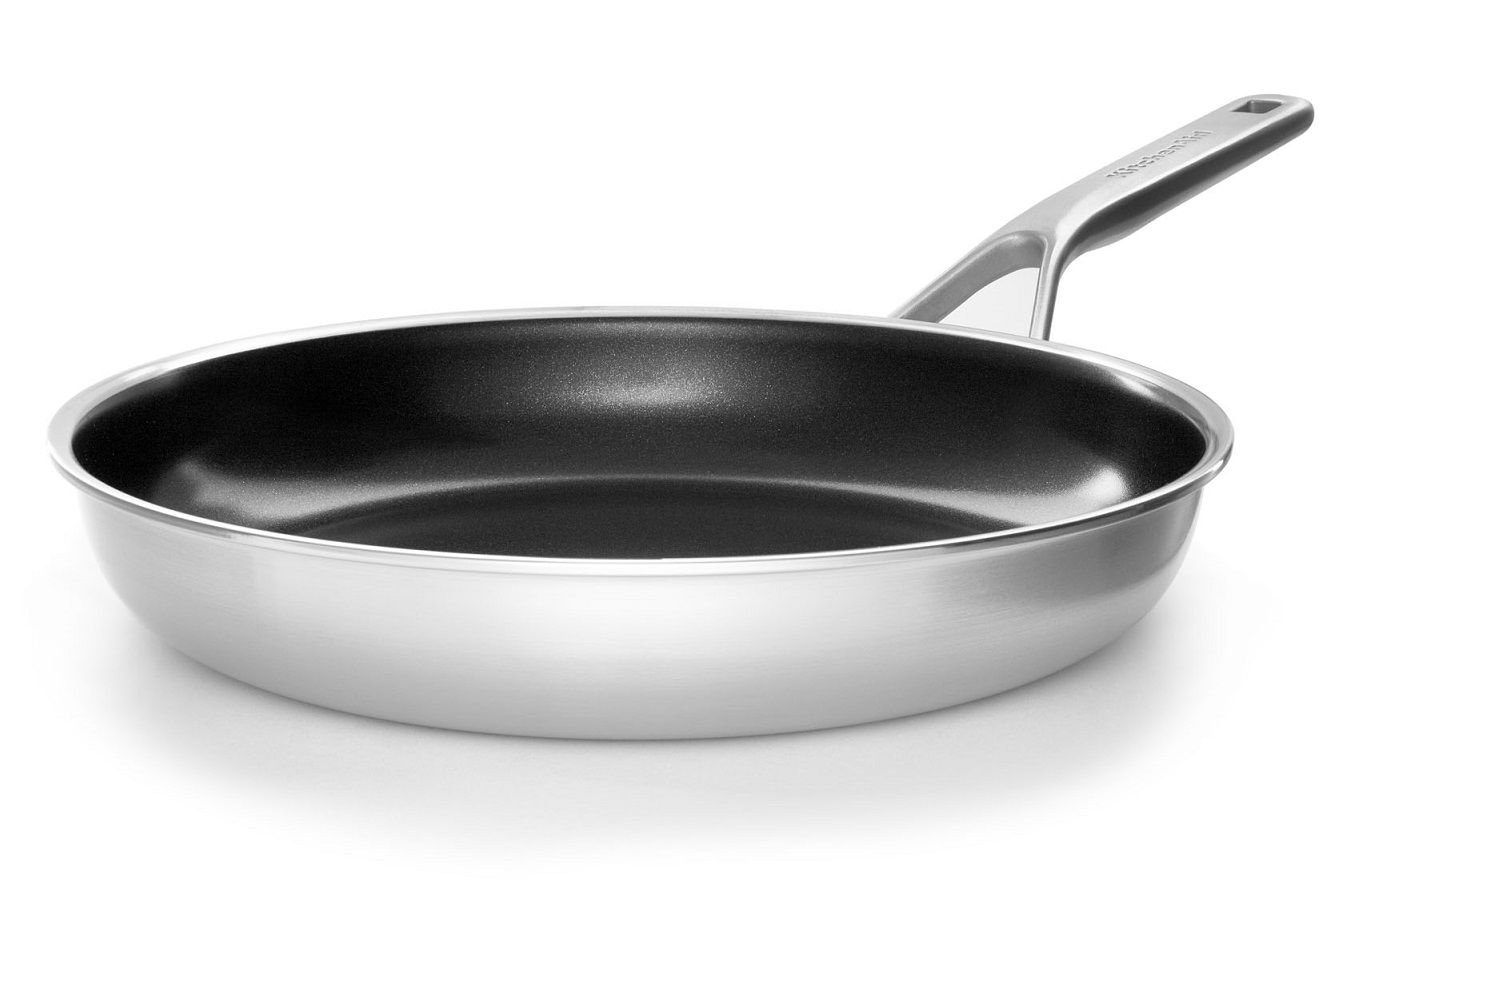 Schep Hover knoop KitchenAid Frying Pan Multi-ply 28 cm | Cookinglife